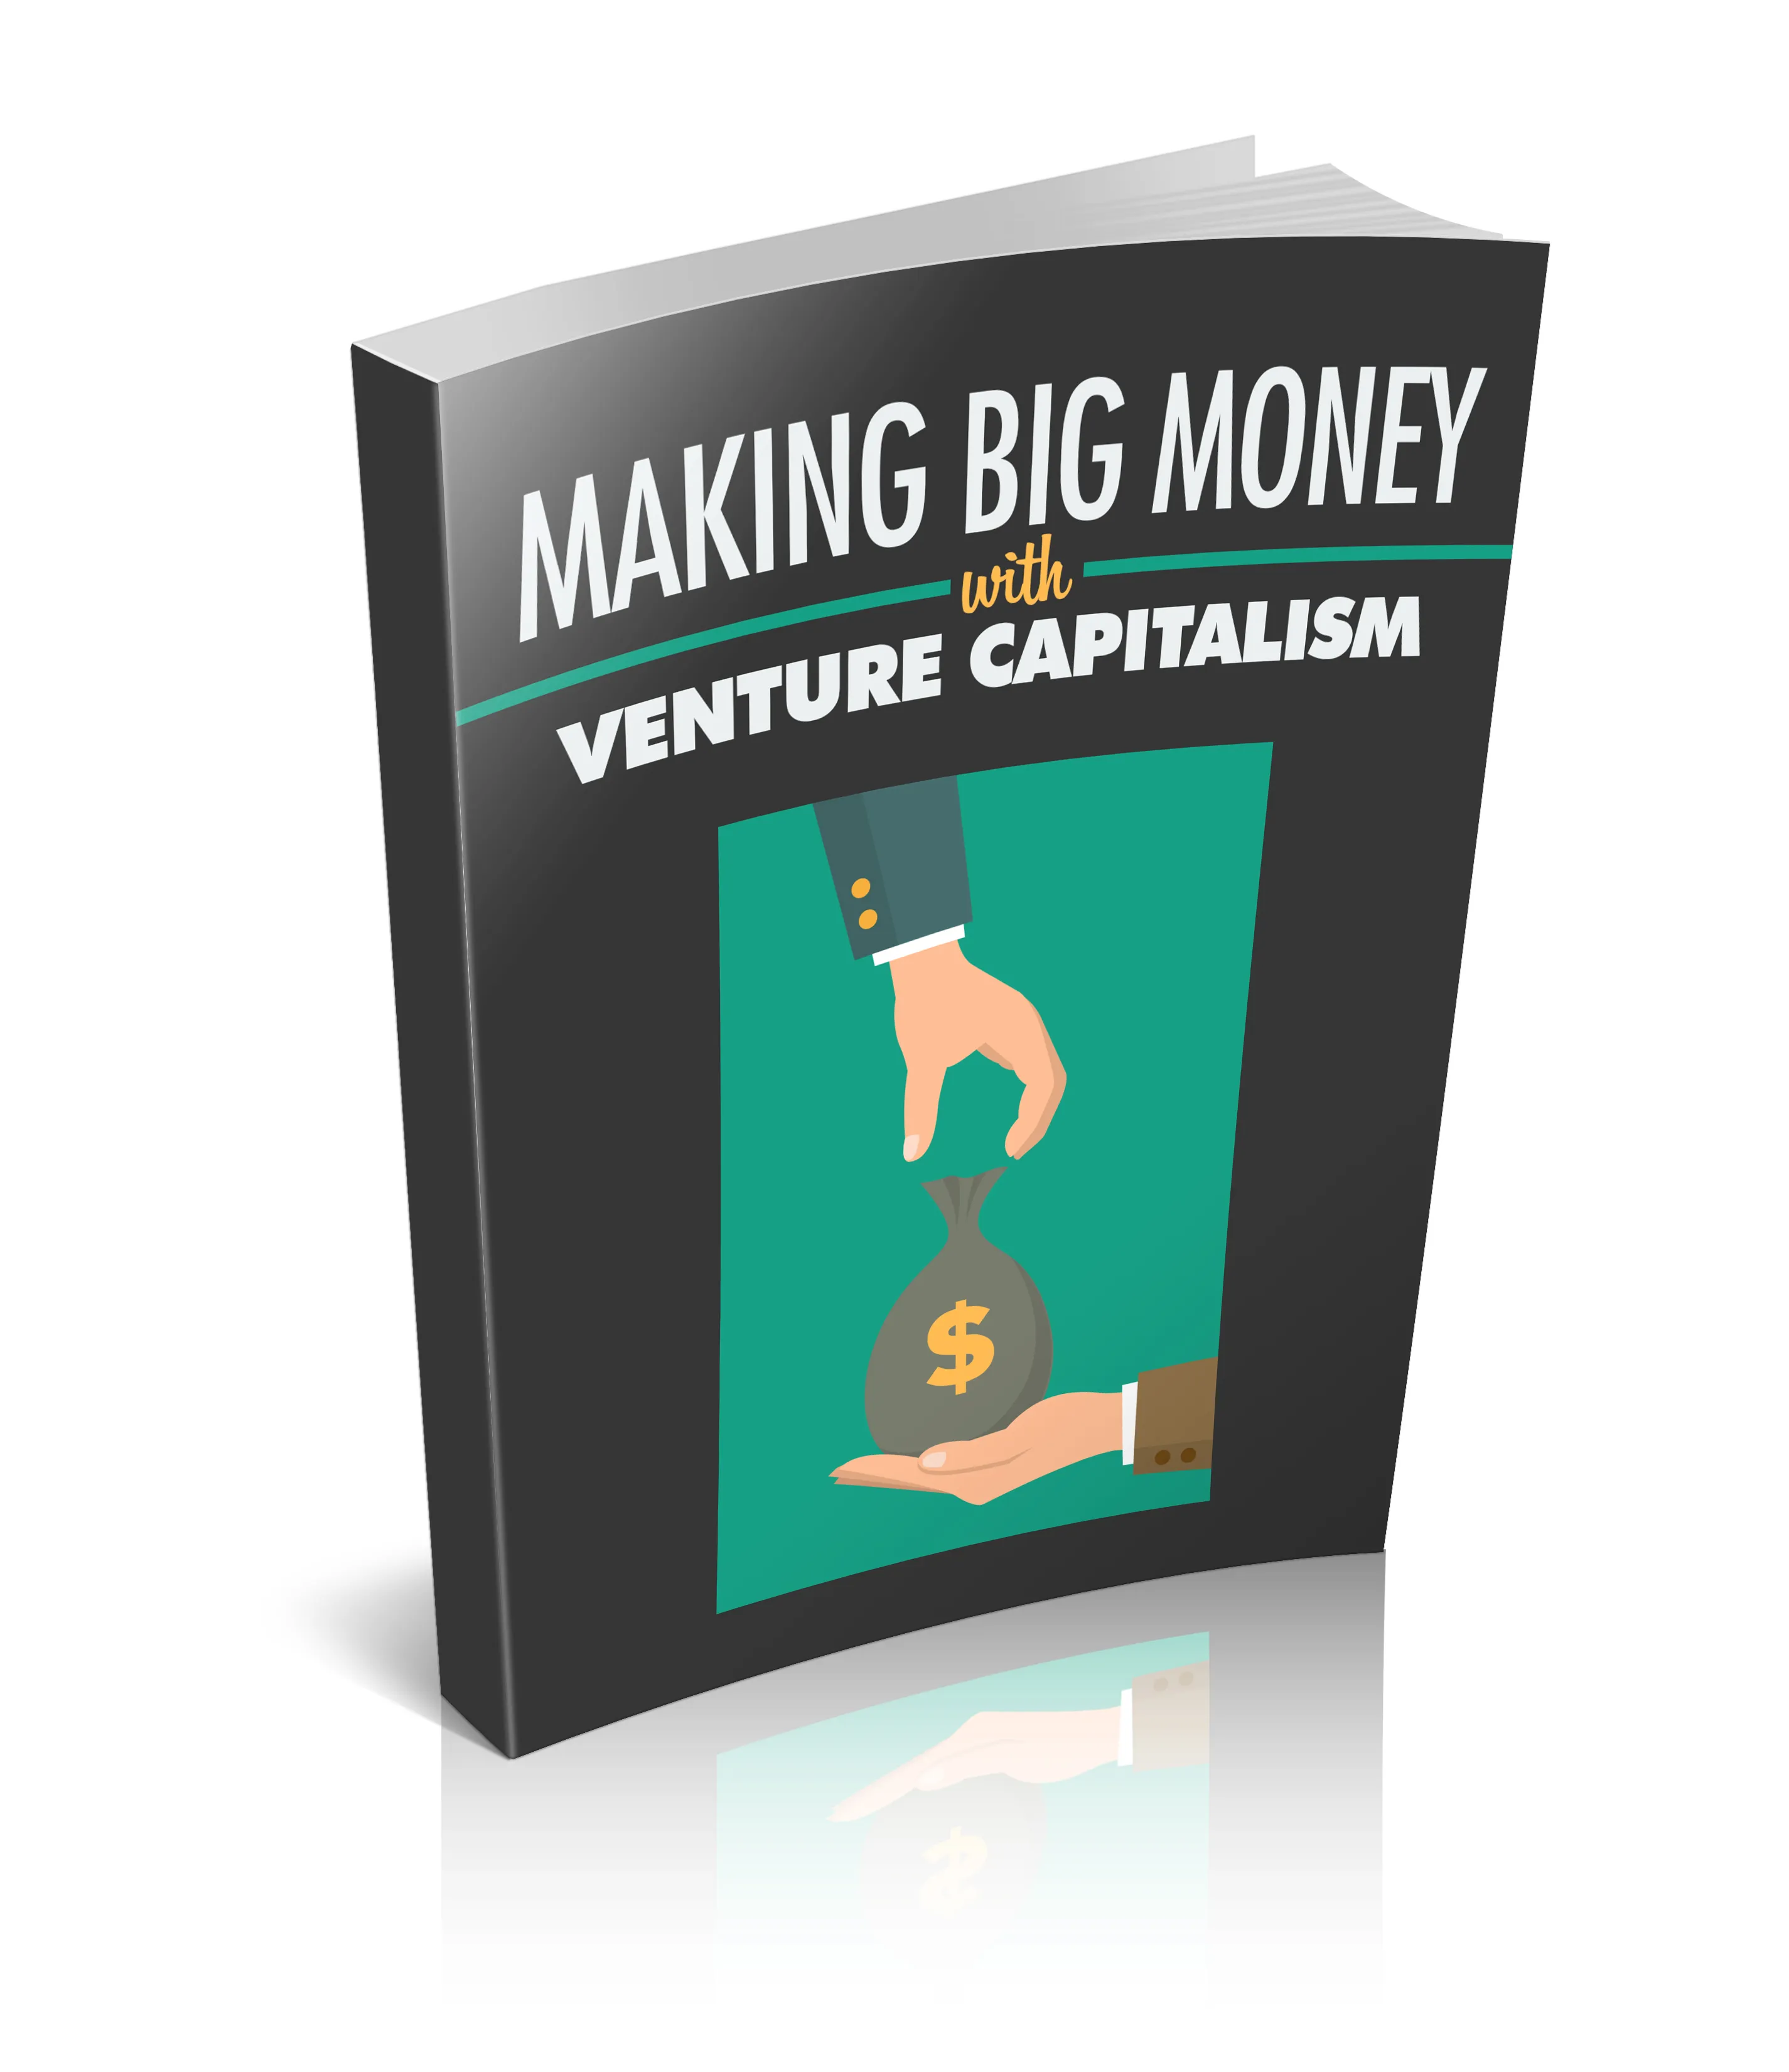 Making Immense Cash With Venture Capitalism.